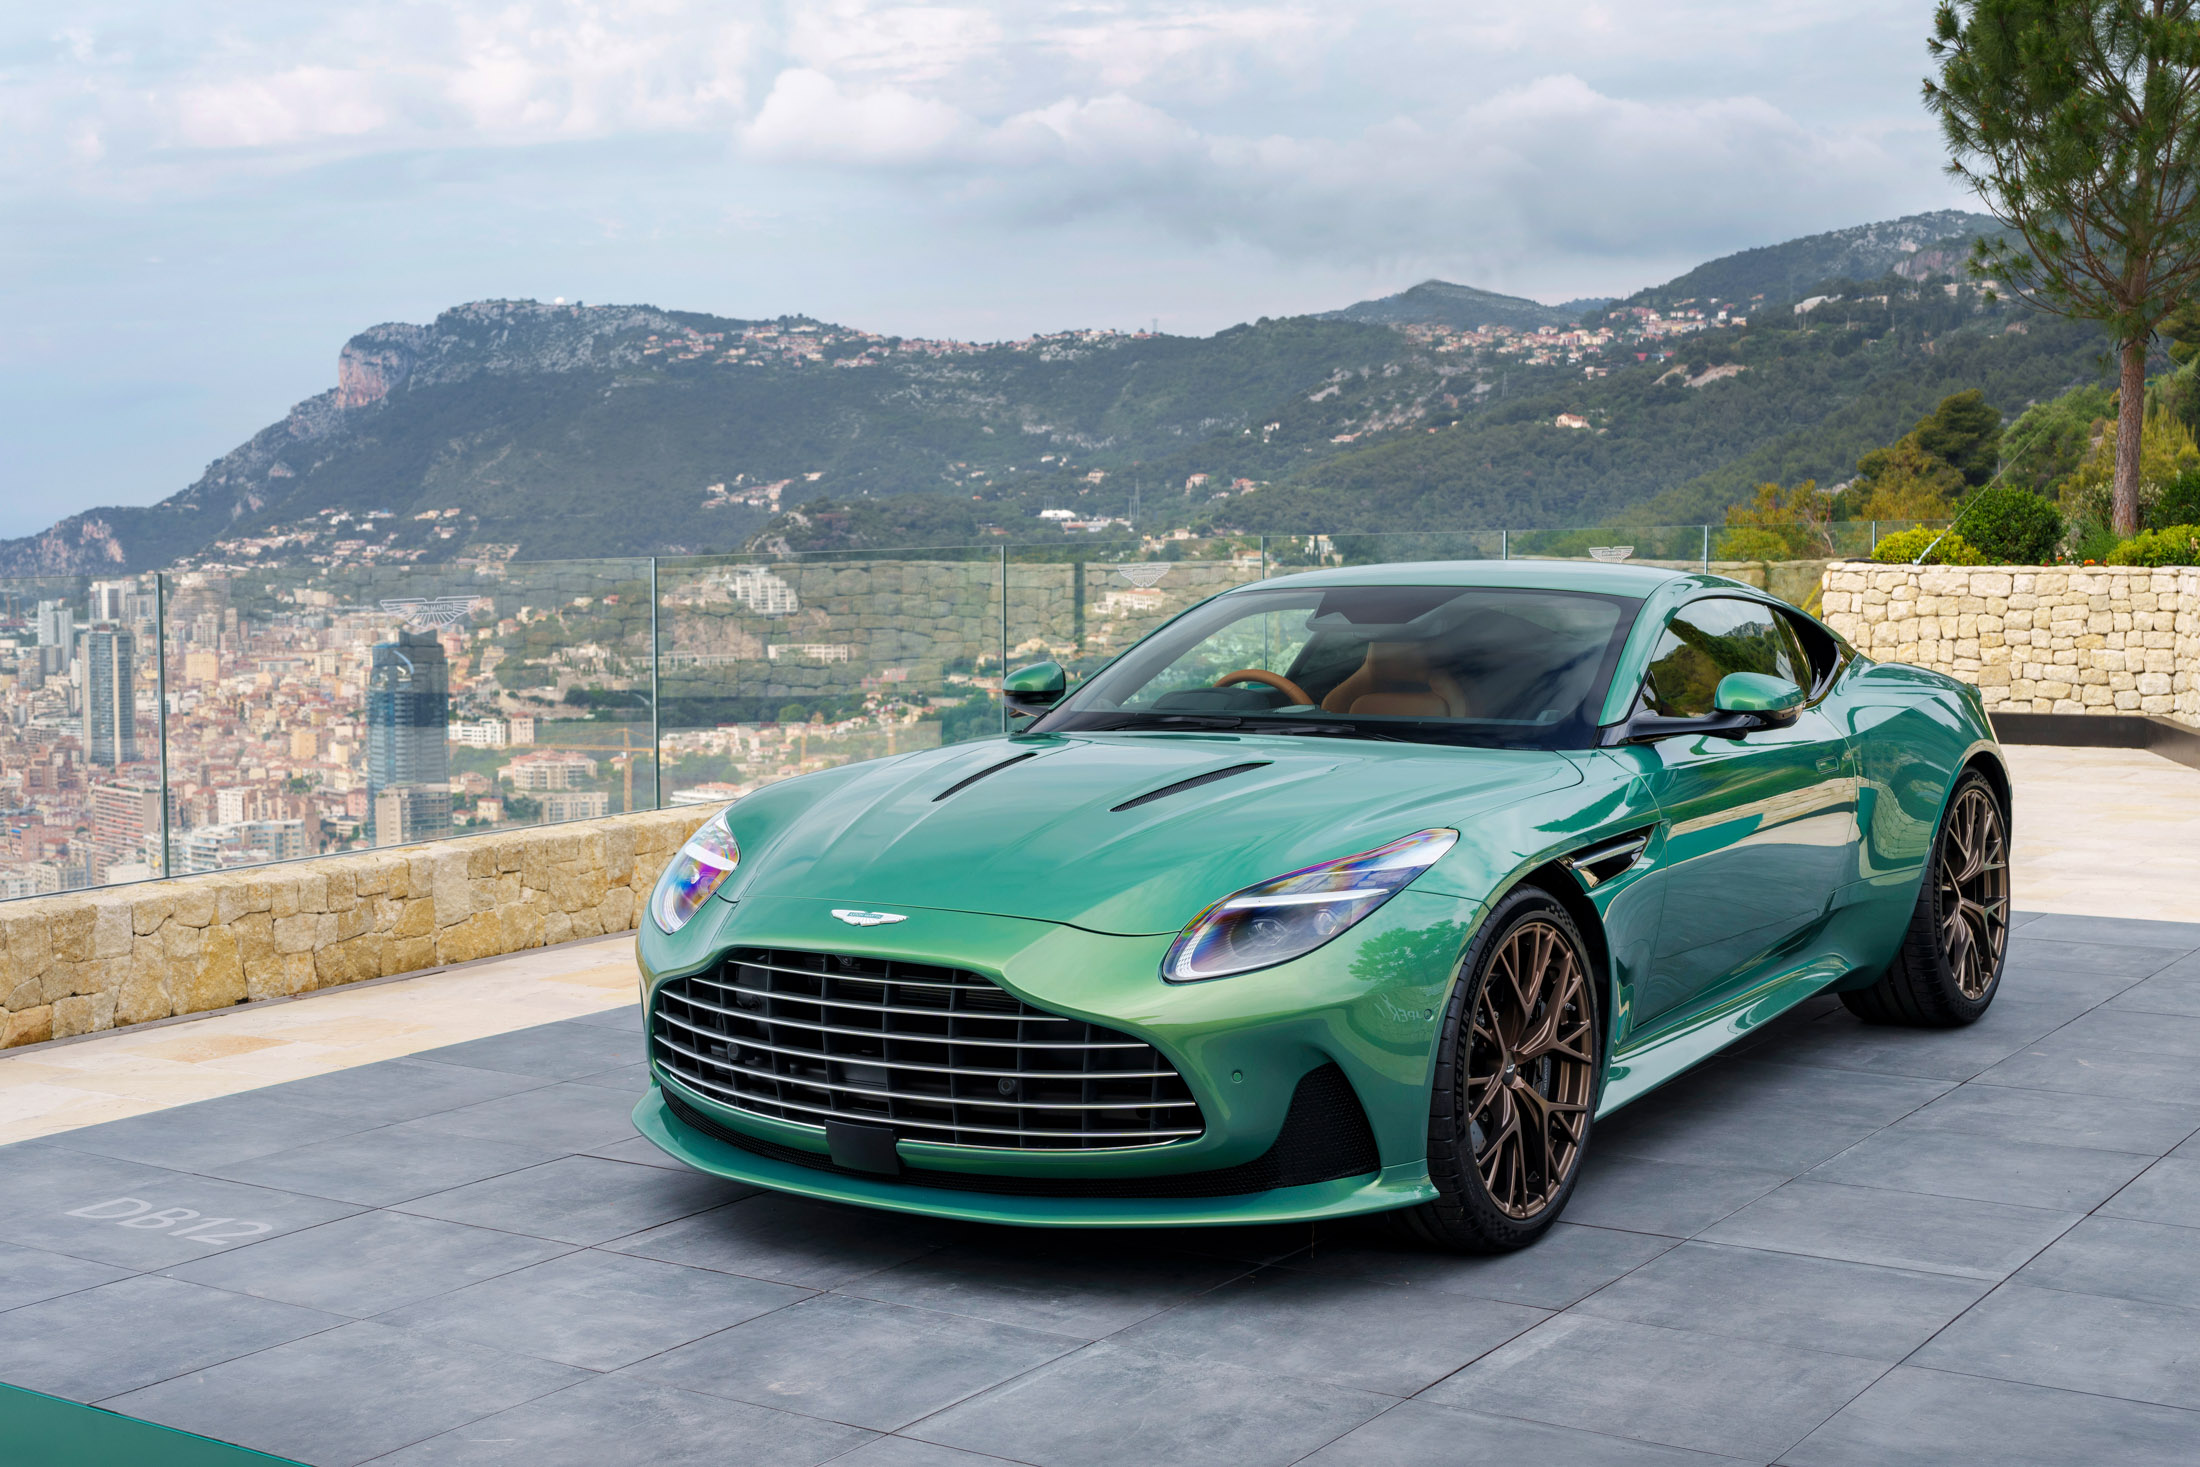 Aston Martin DB12 Review: Test-Driving the $245,000 Coupe in Monte Carlo -  Bloomberg